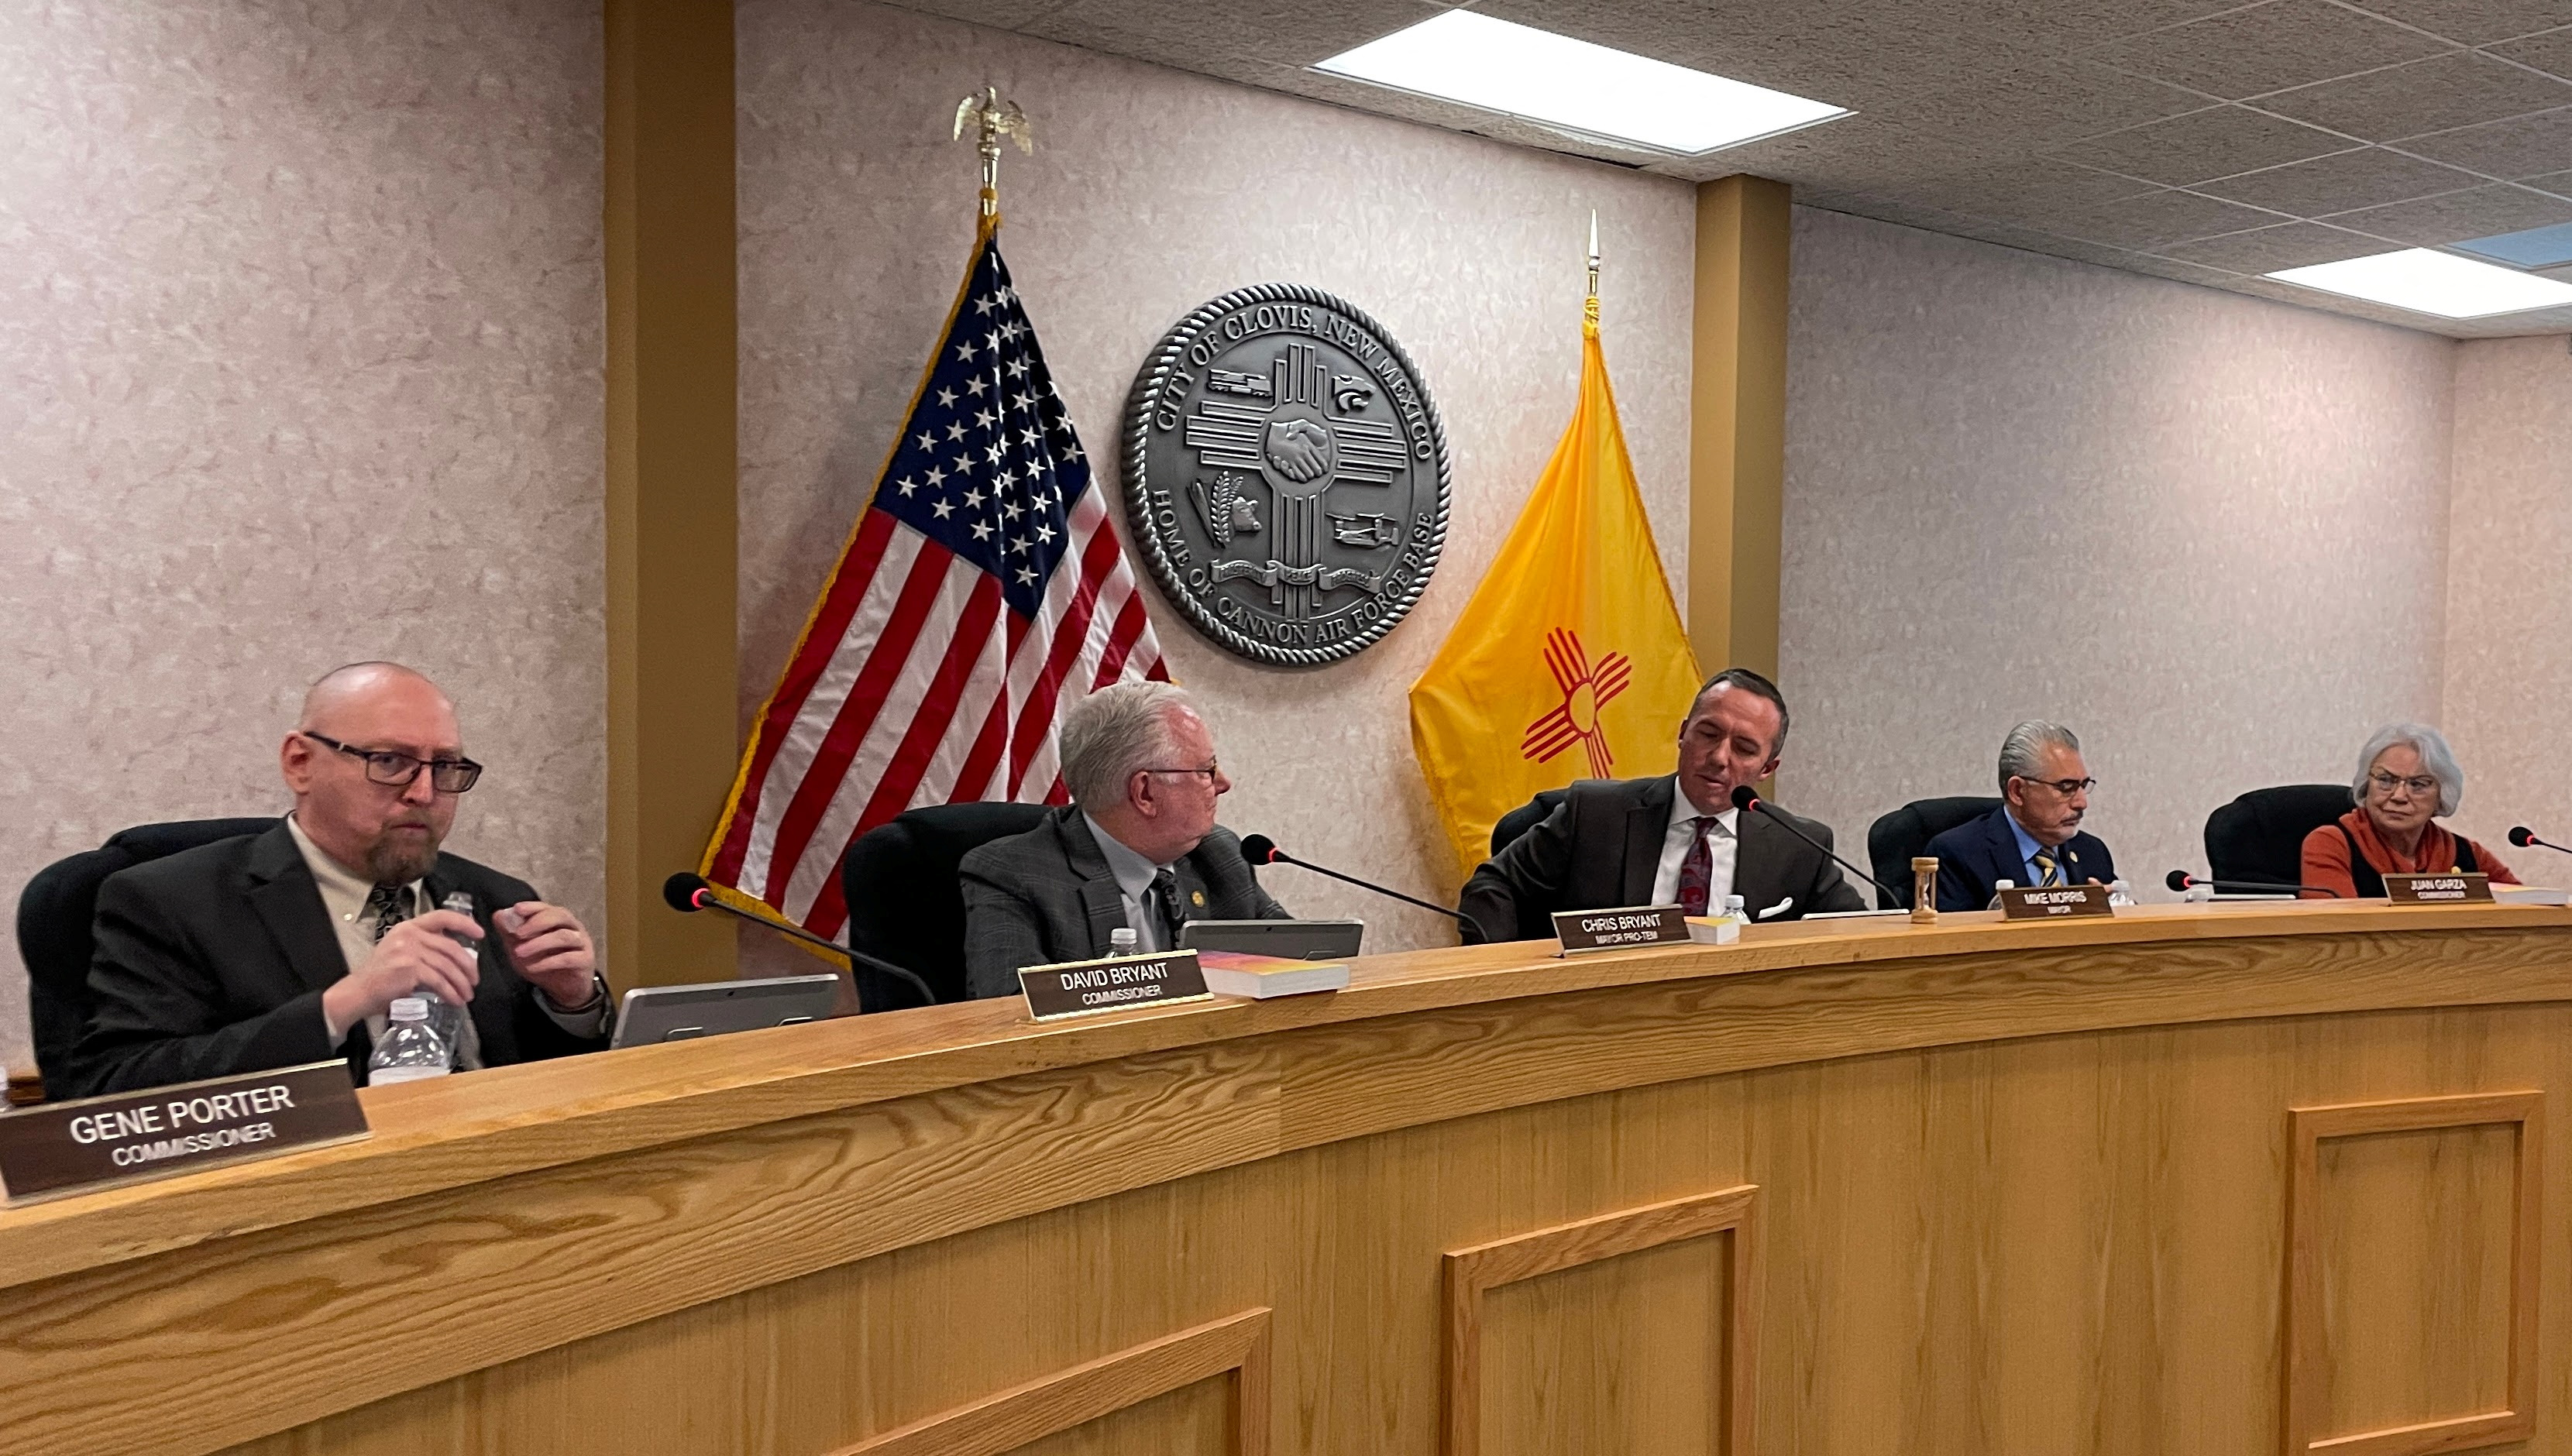 Clovis Mayor Mike Morris presides over a city commission meeting in Clovis